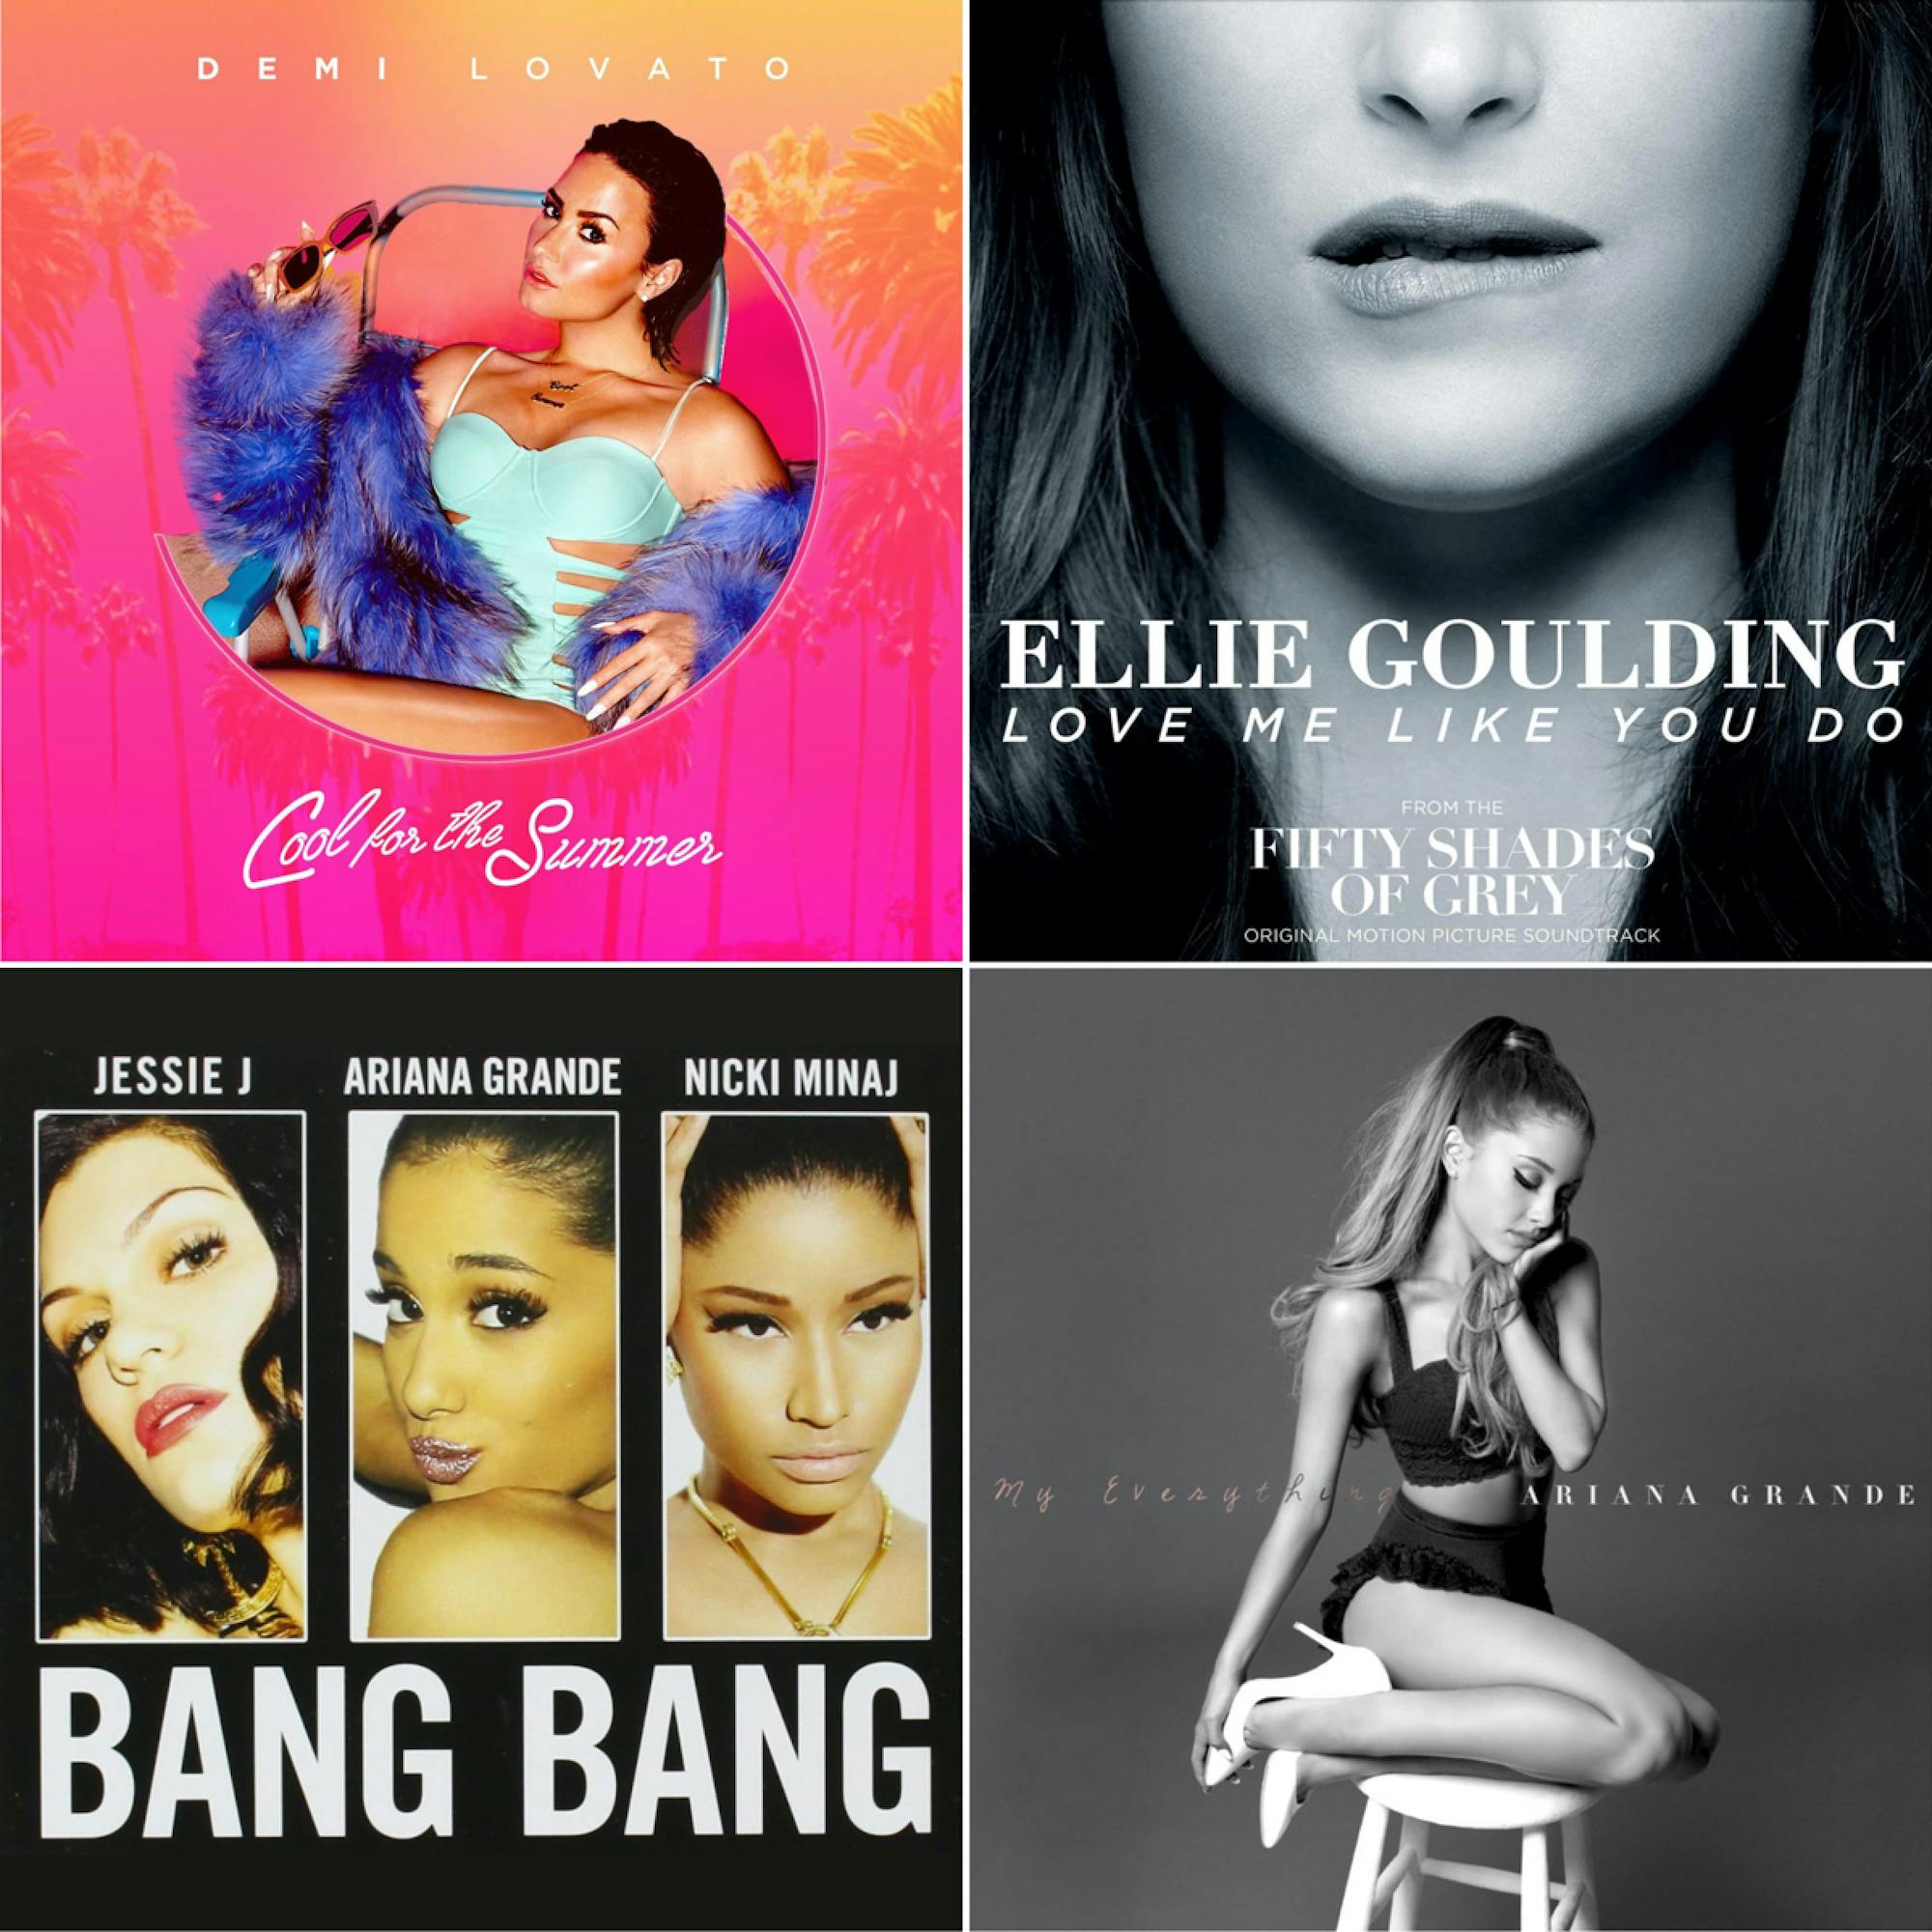 From top left to bottom right: Album or single covers for “Cool for the Summer” by Demi Lovato, “Love Me Like You Do” by Ellie Goulding, “Bang Bang” by Jessie J, Ariana Grande, and Nicki Minaj, and My Everything by Ariana Grande